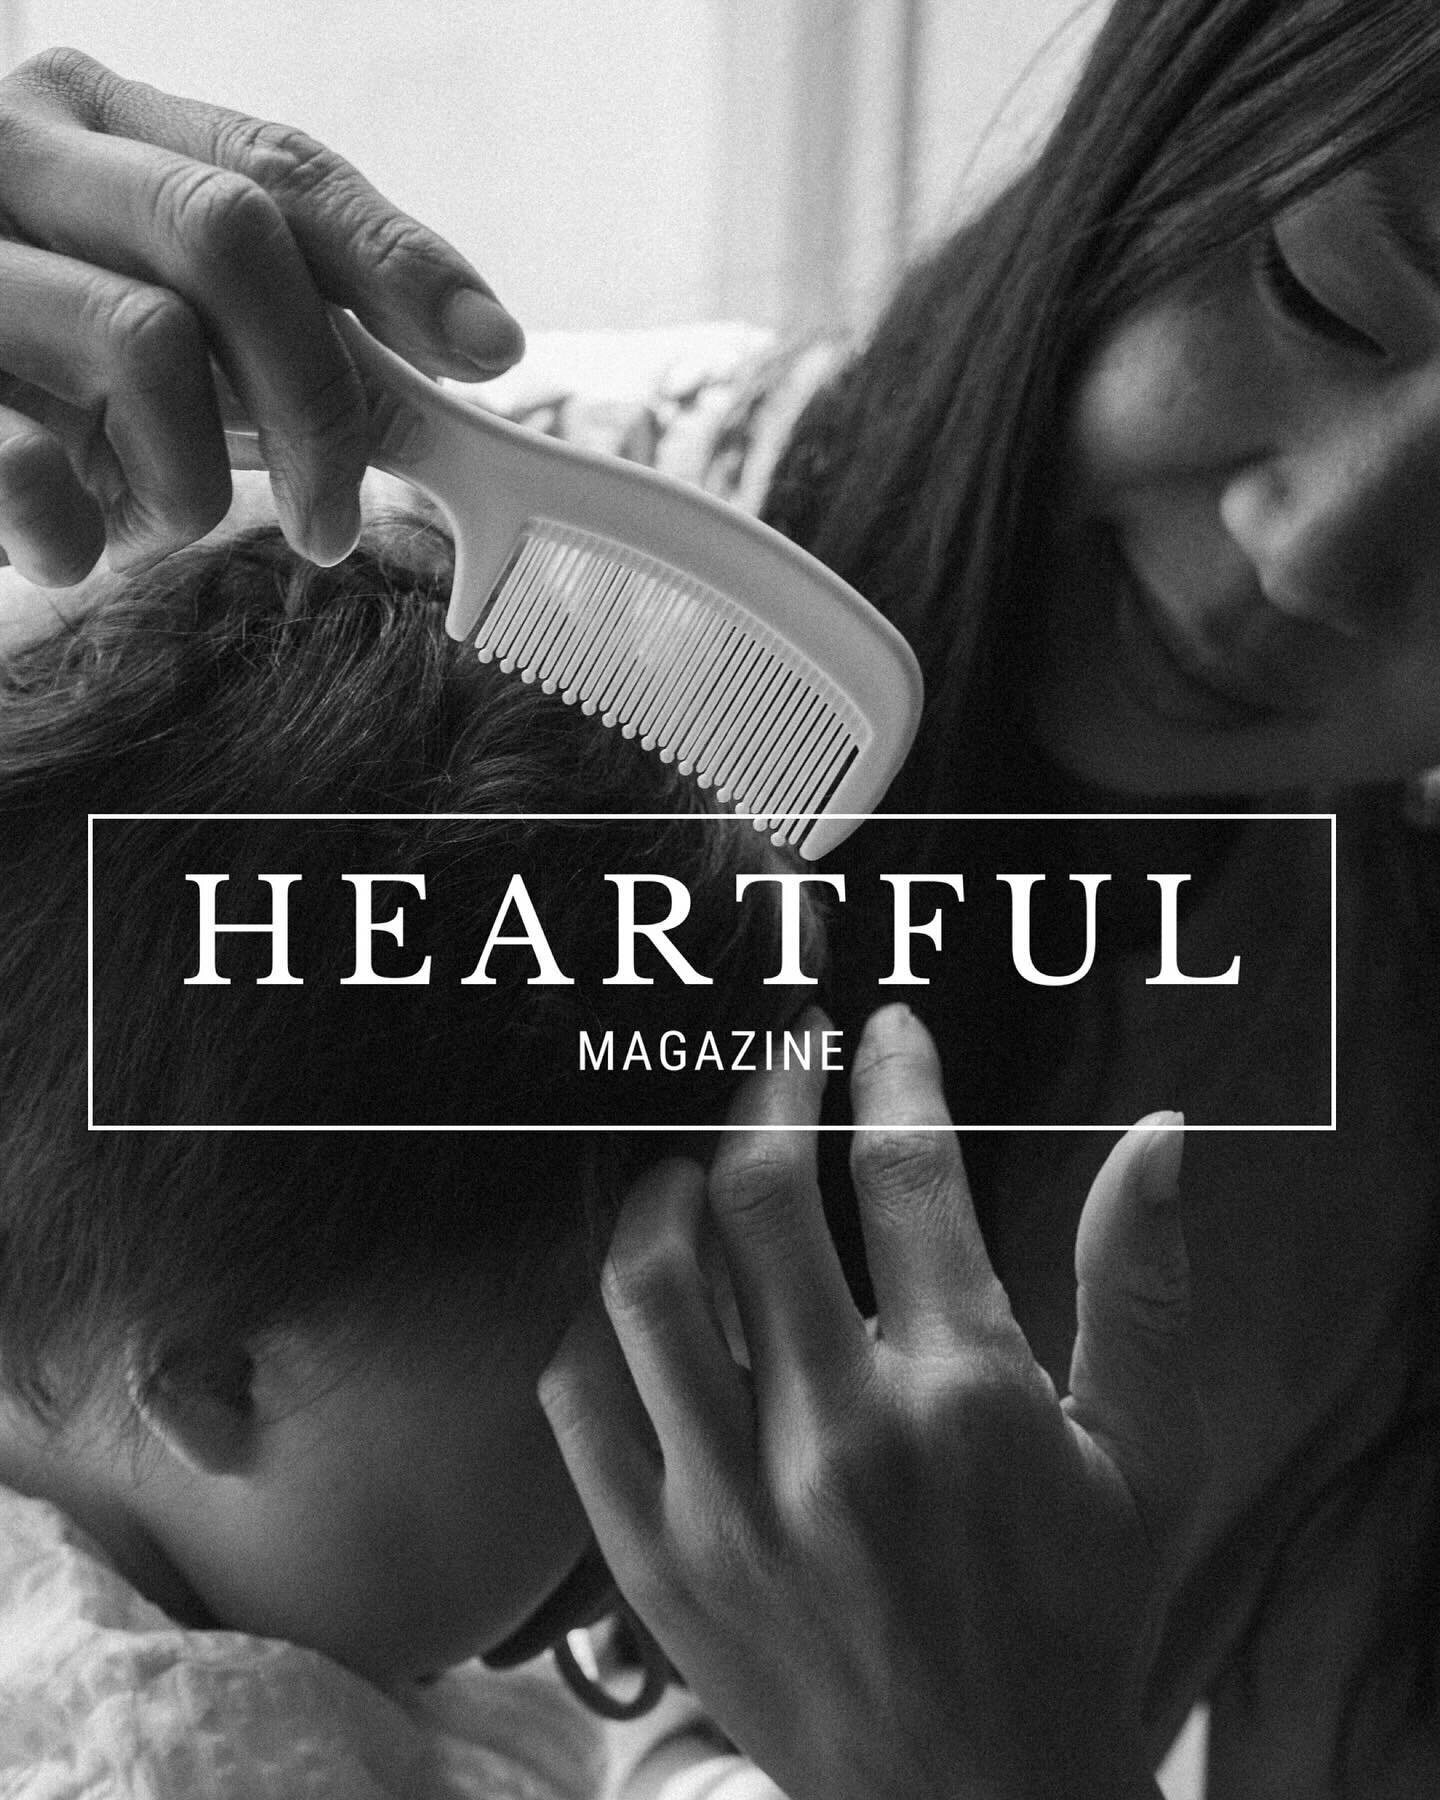 Beyond honored to have my work featured in the beautiful @heartfulmagazine spring edition. 

Thank you so much @brookebschultz for creating such a stunning magazine that highlights the importance of family and motherhood photography and the artistry 